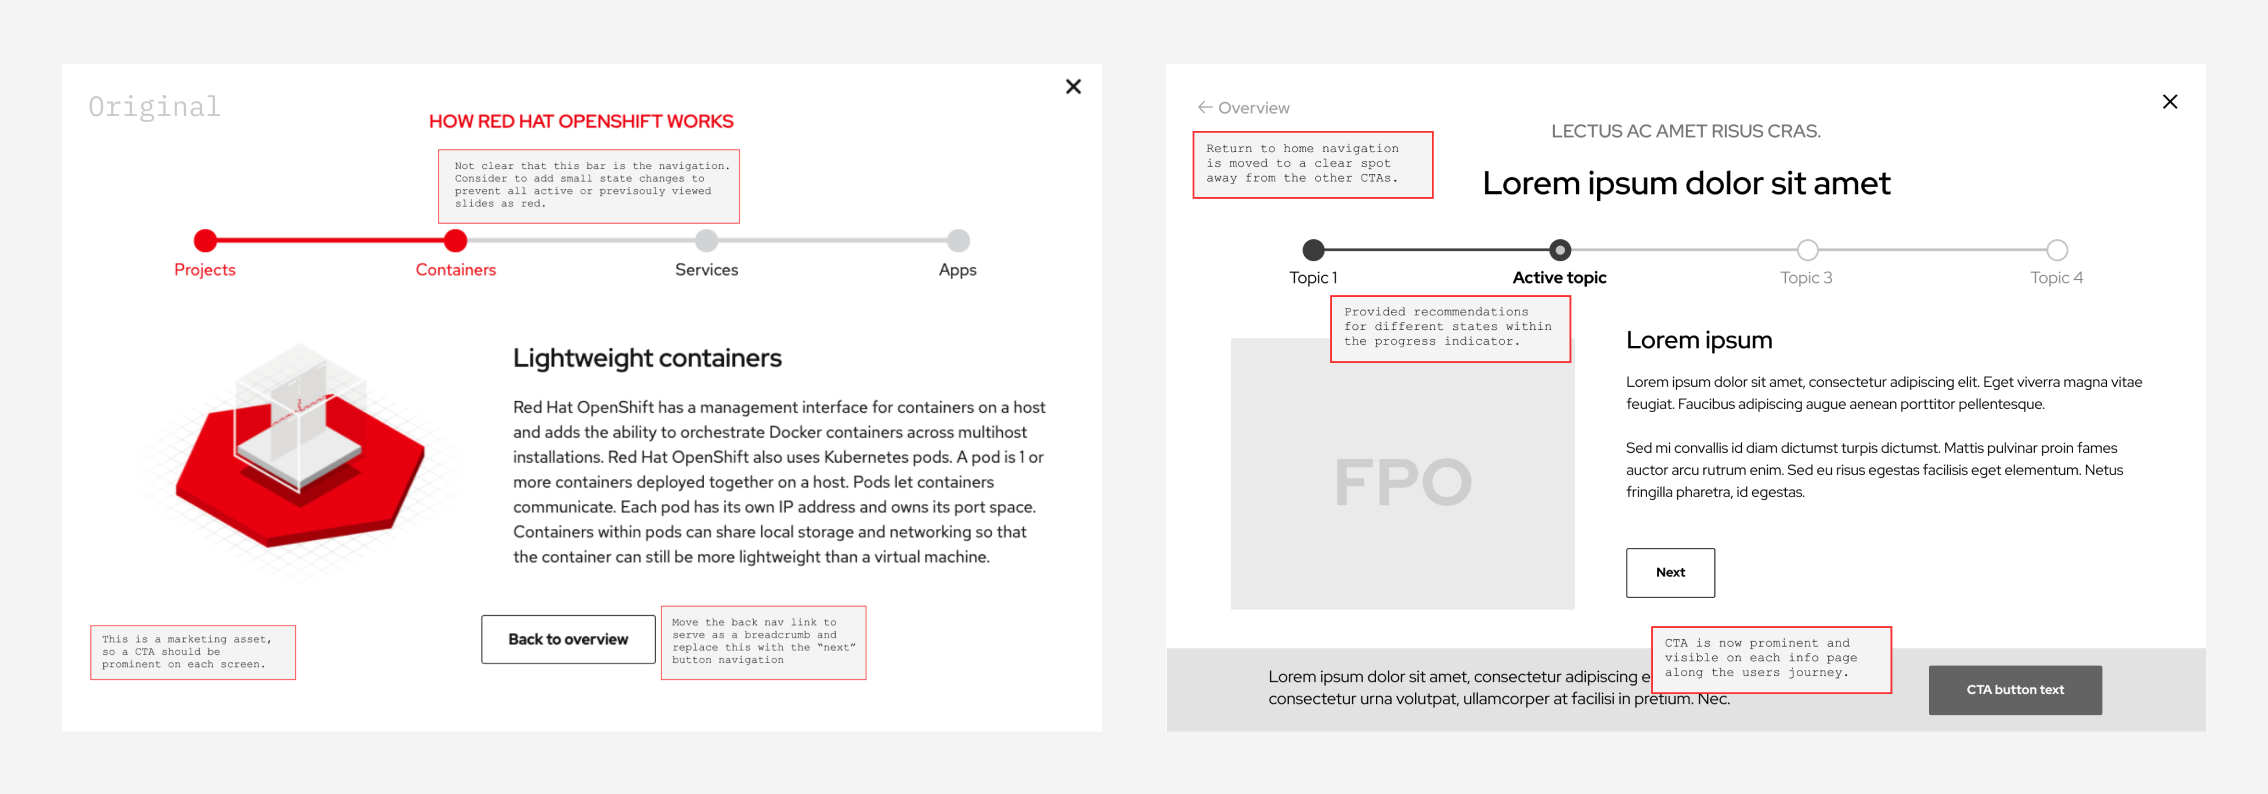 another comparison of original modal and proposed wireframe